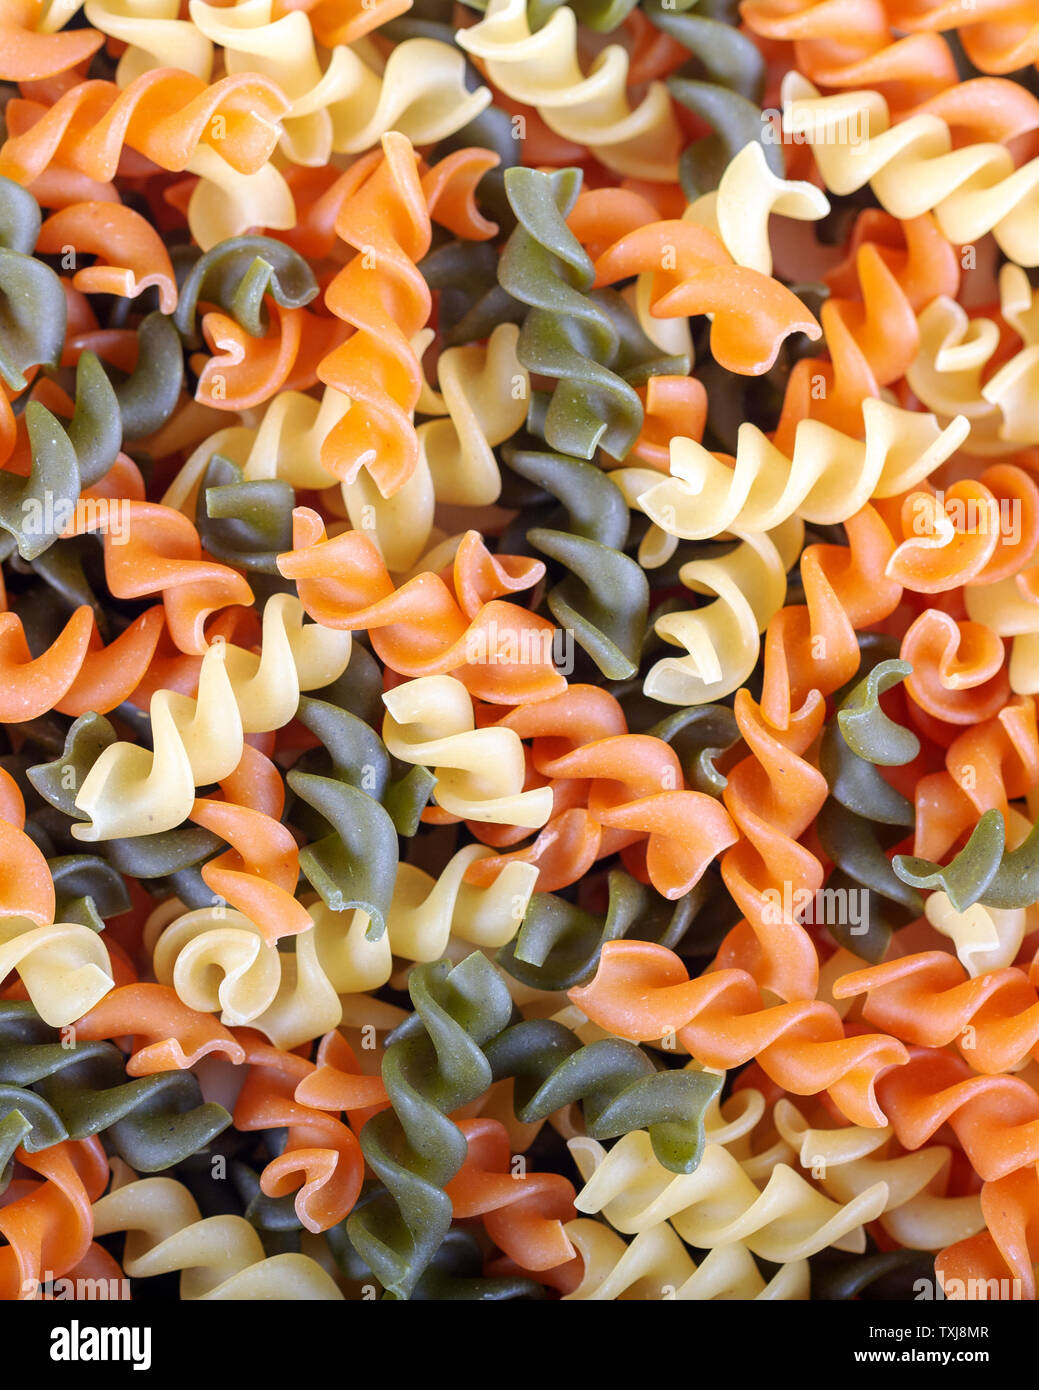 Colorful raw rutini pasta with vegetables like as background. Stock Photo